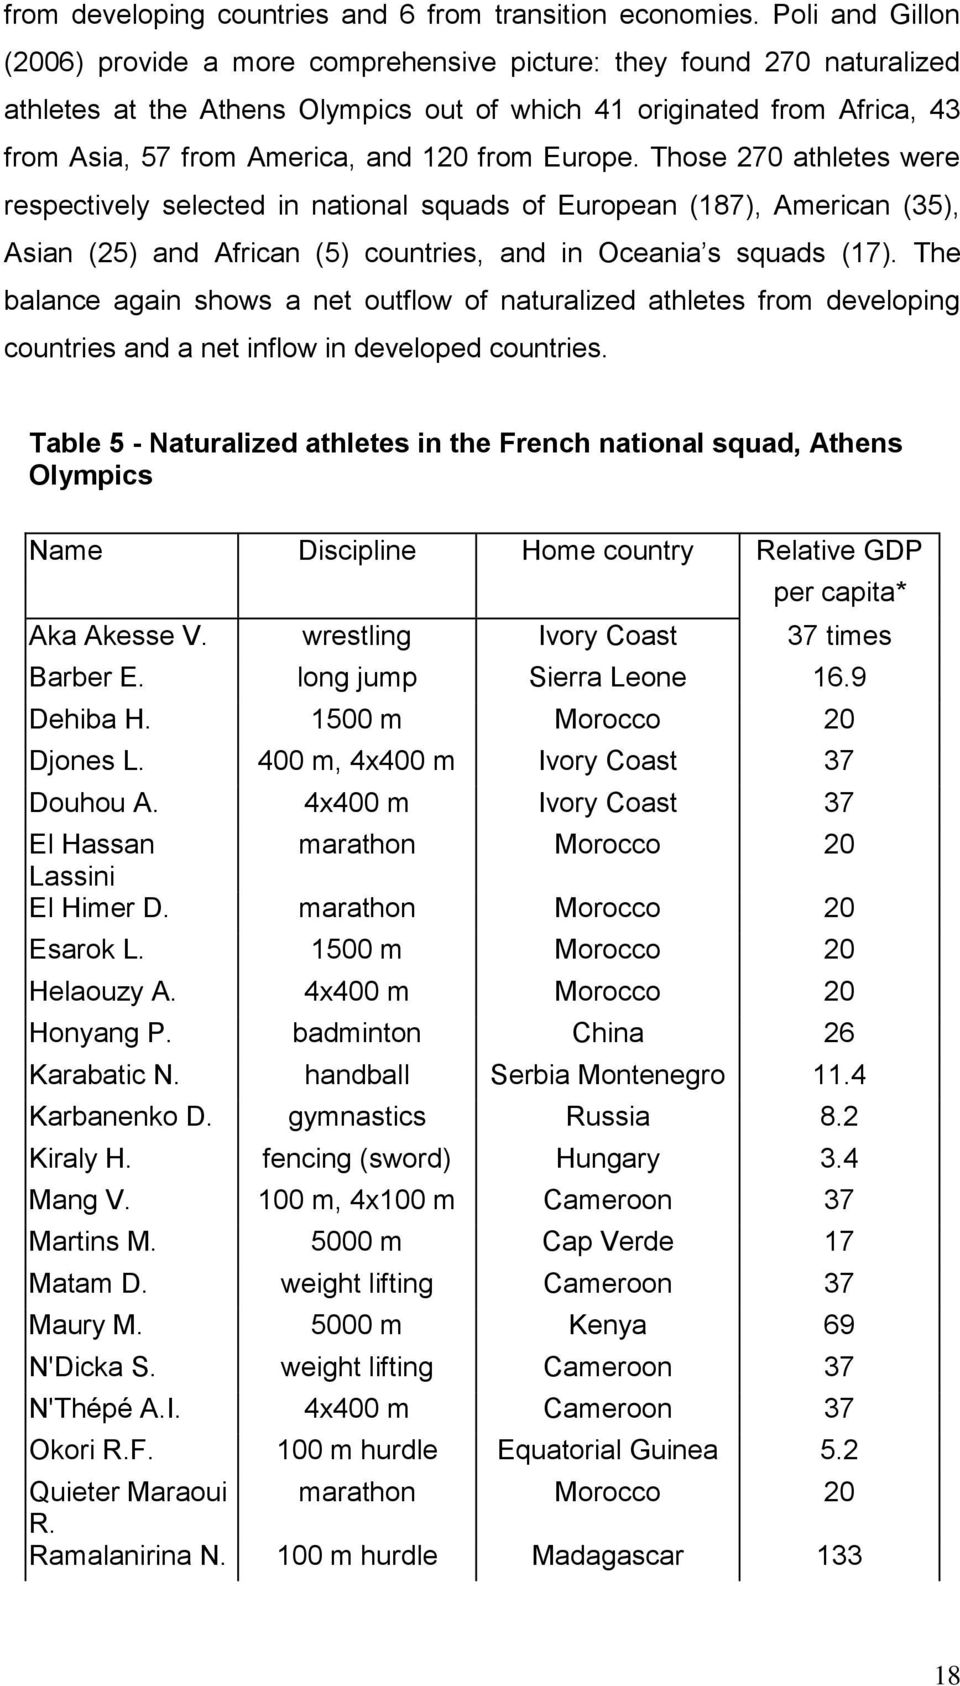 from Europe. Those 270 athletes were respectively selected in national squads of European (187), American (35), Asian (25) and African (5) countries, and in Oceania s squads (17).